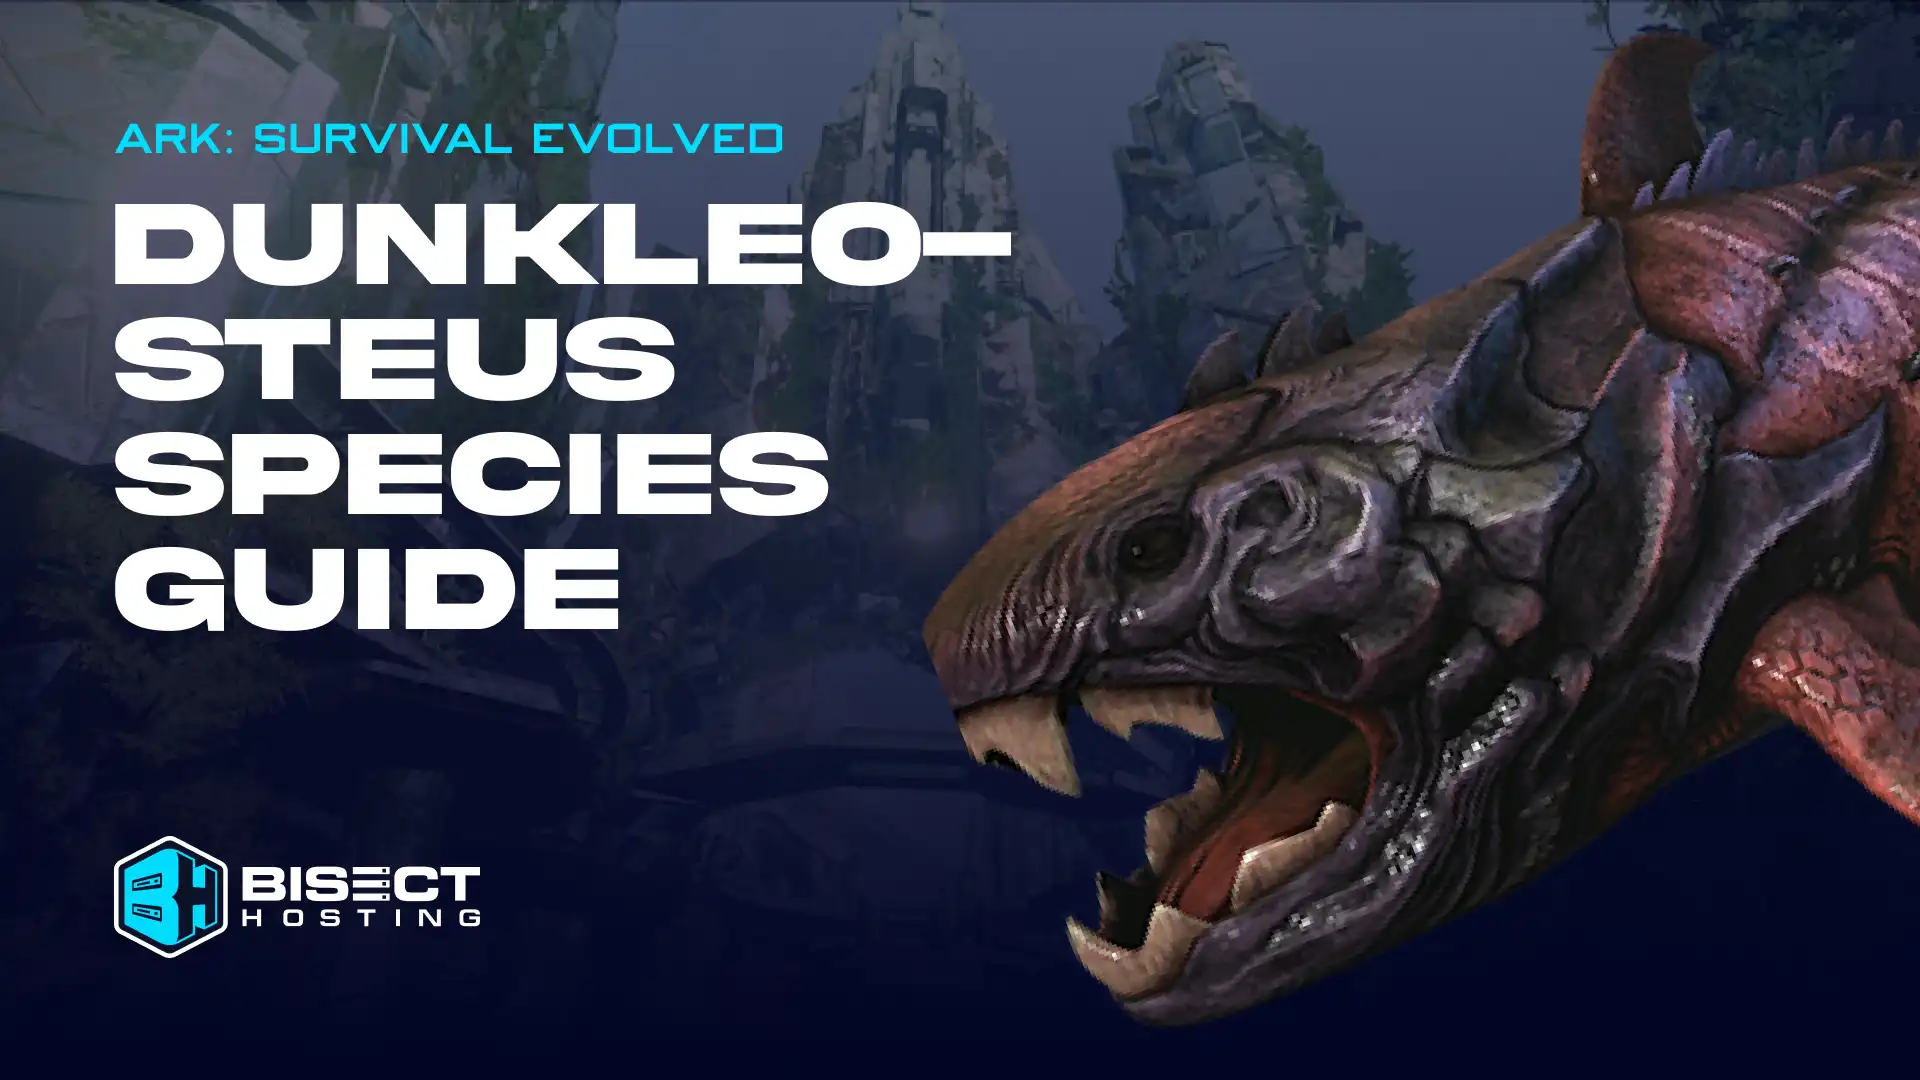 ARK: Survival Evolved Dunkleosteus Species Guide - How to Tame, Locations, & More